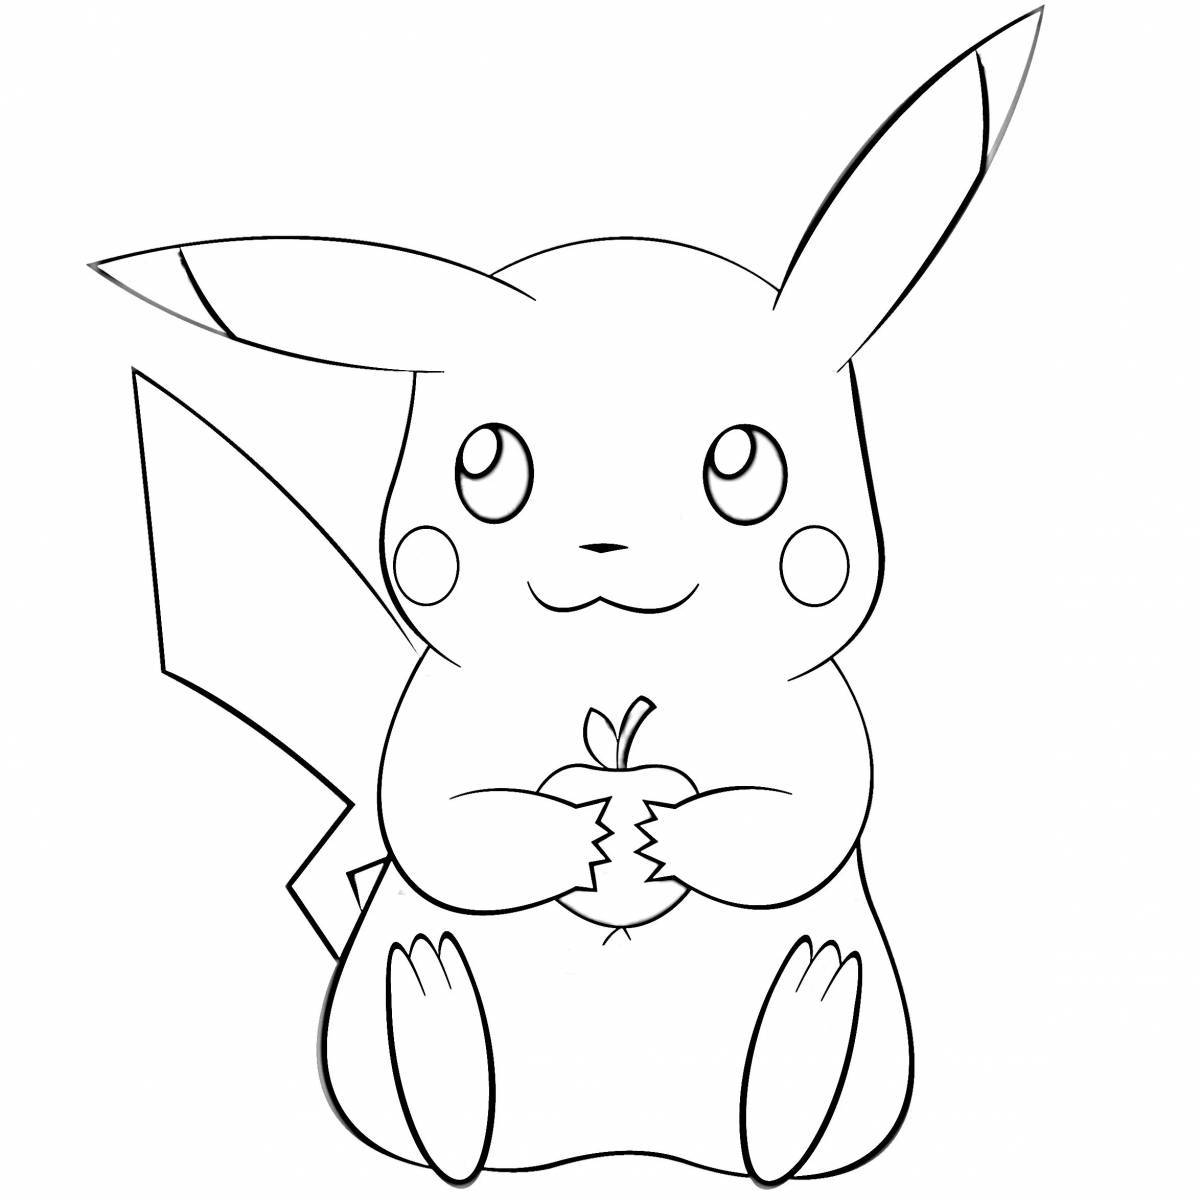 Pikachu coloring book for kids